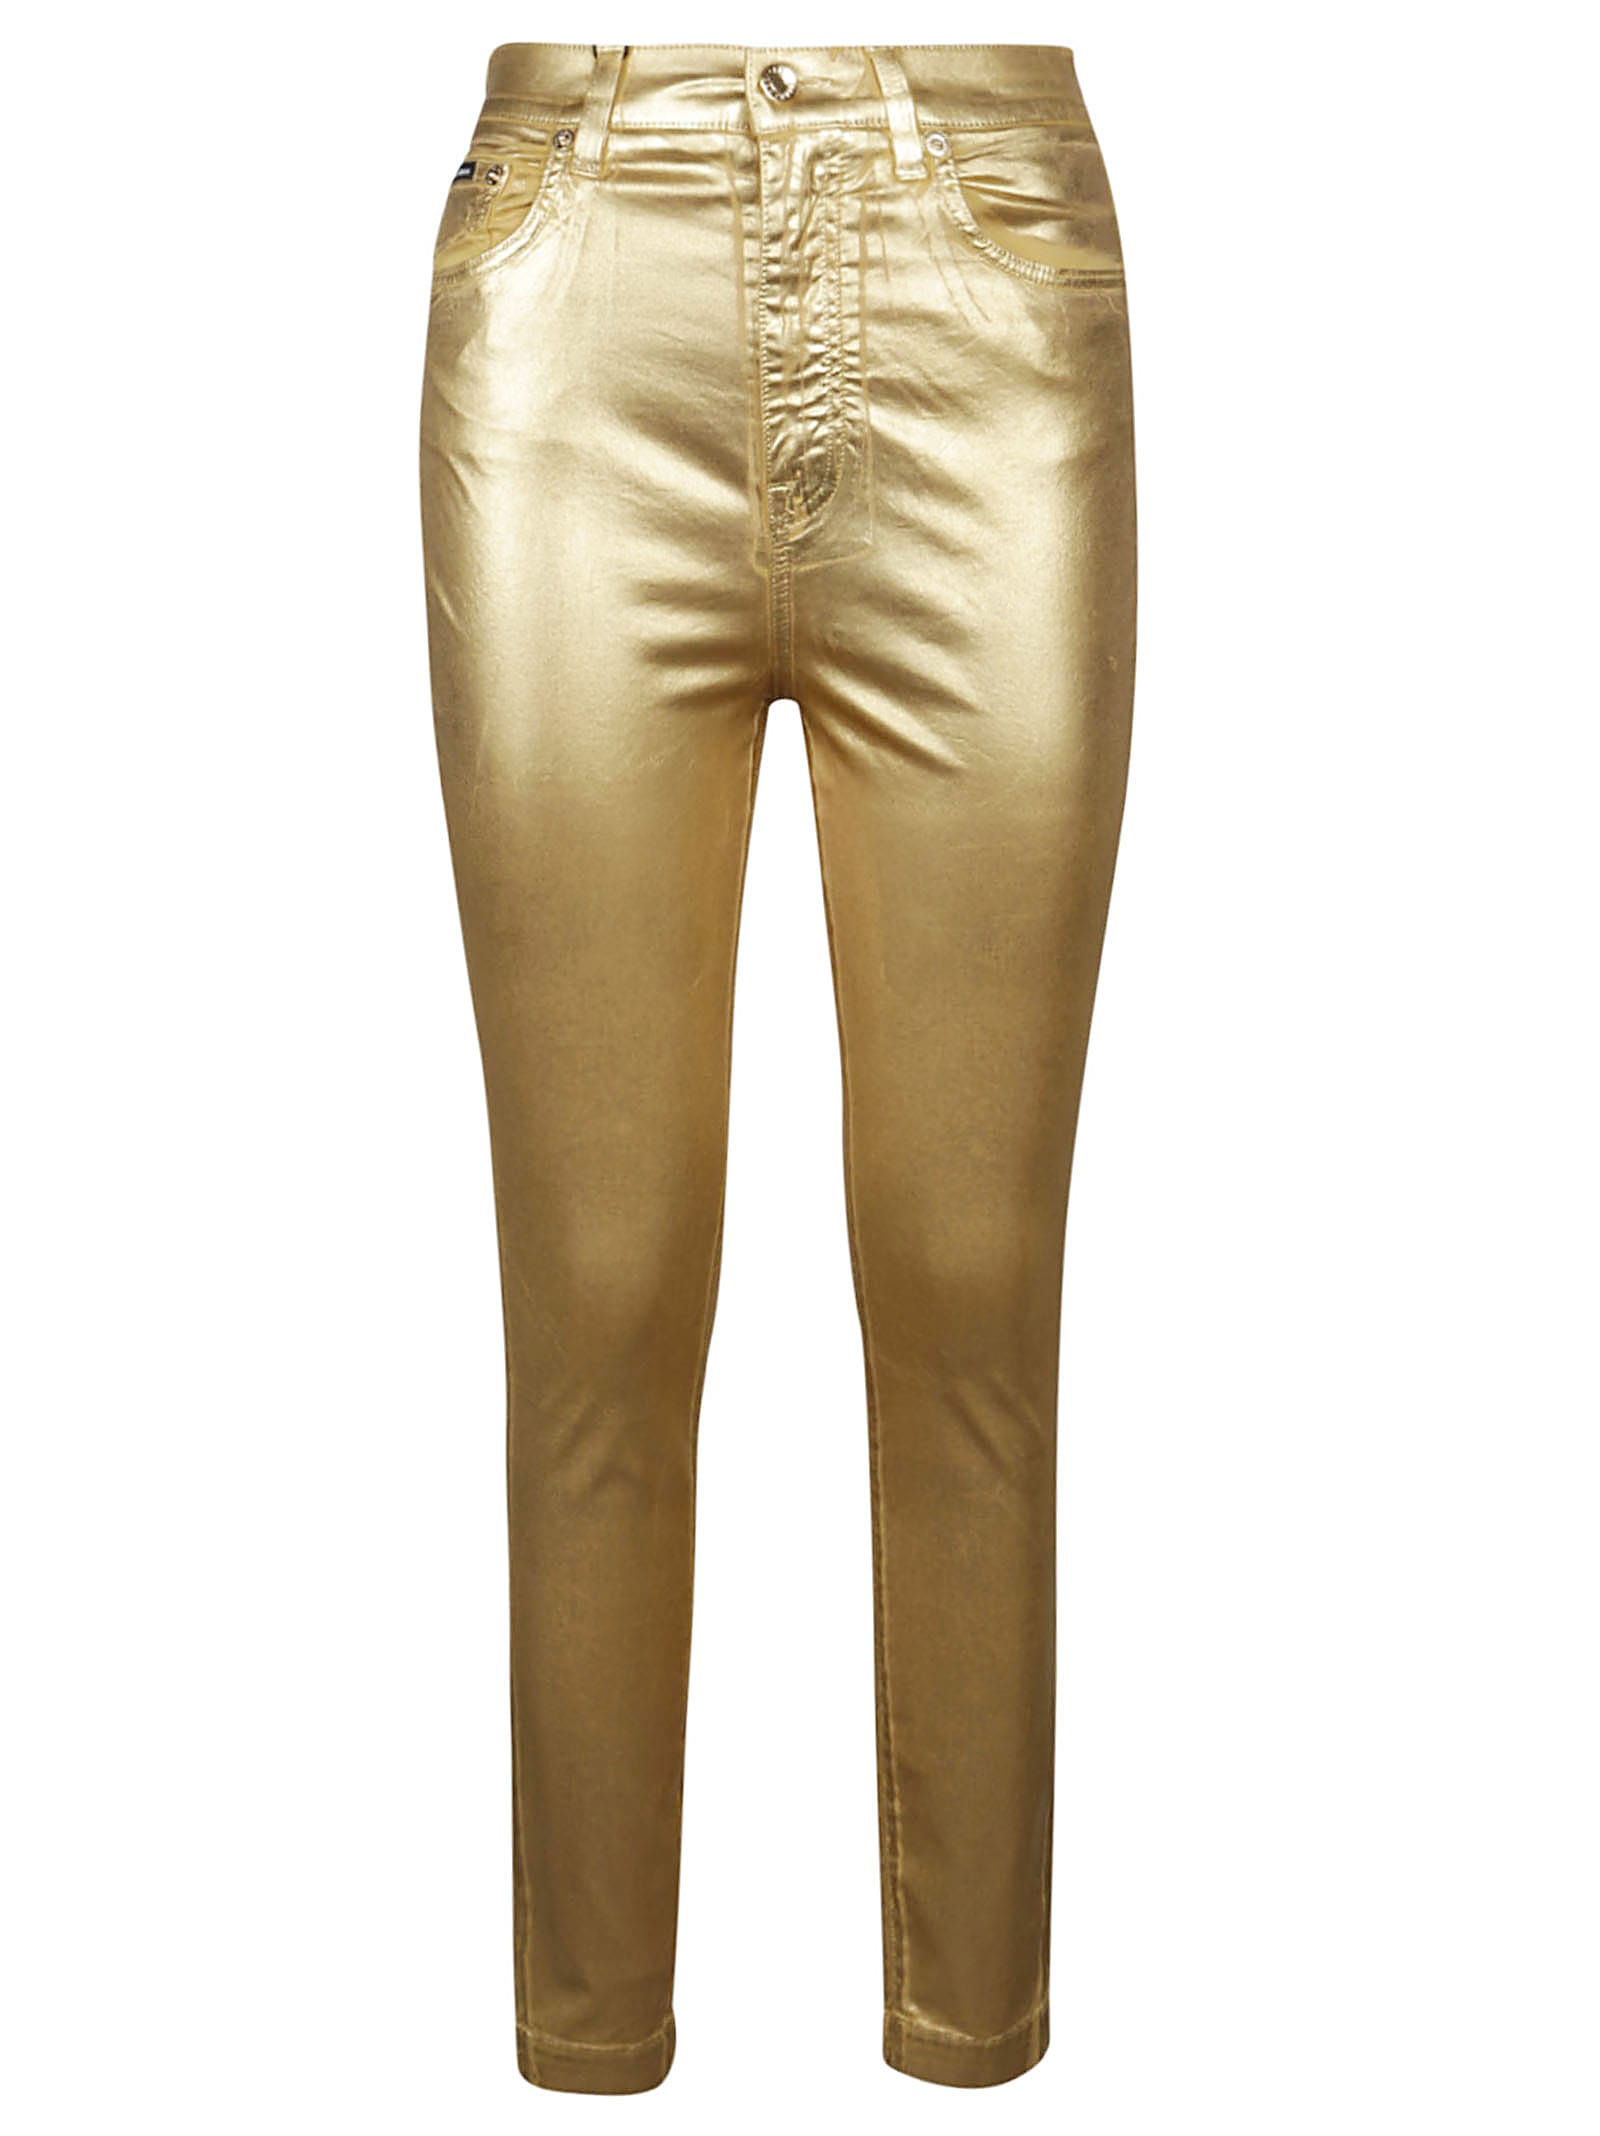 Dolce & Gabbana Glossy Fitted Jeans